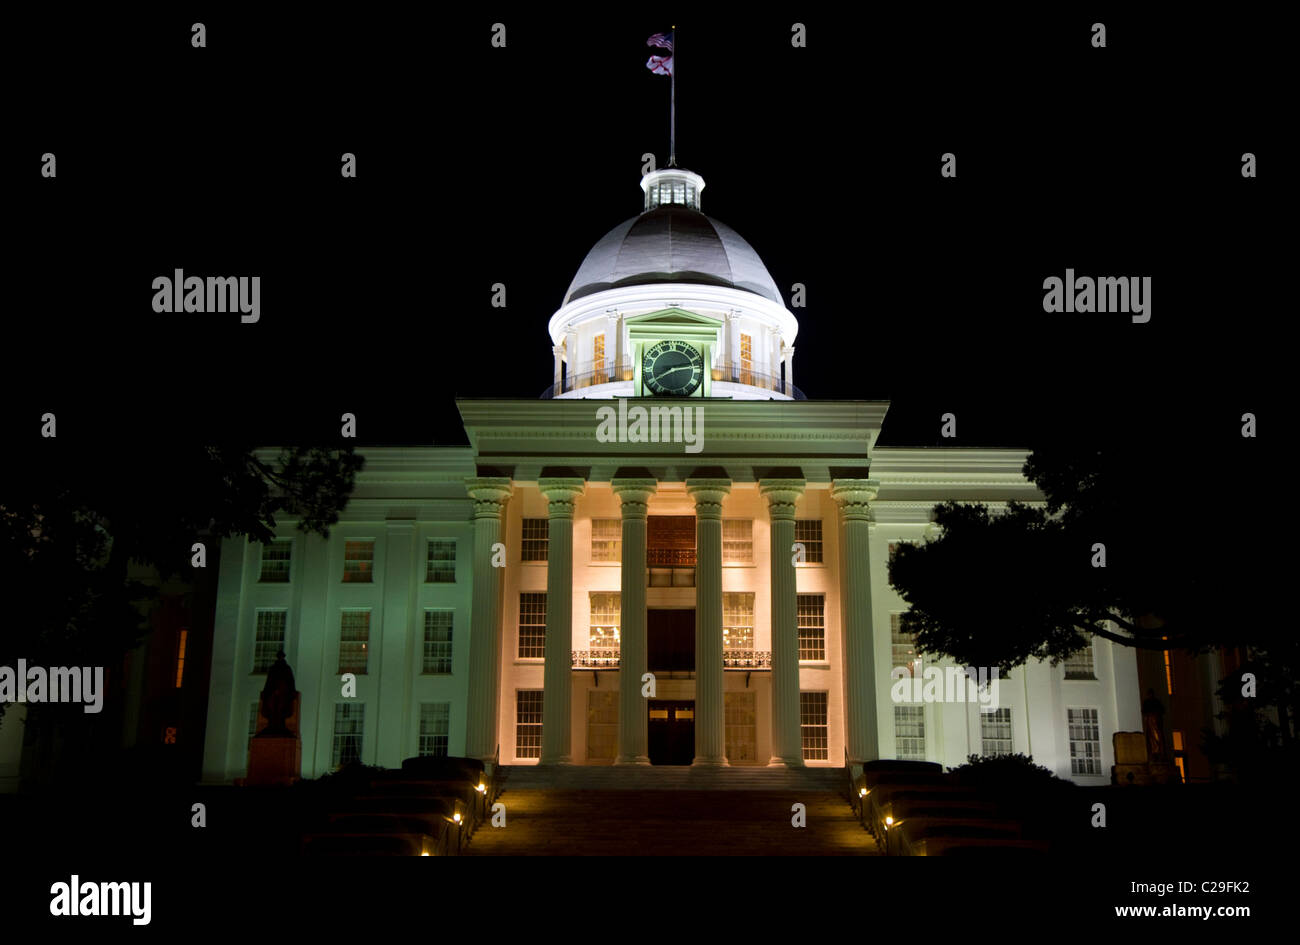 The Alabama State Capitol Building at night located on Goat Hill in Montgomery, Alabama, USA. Stock Photo